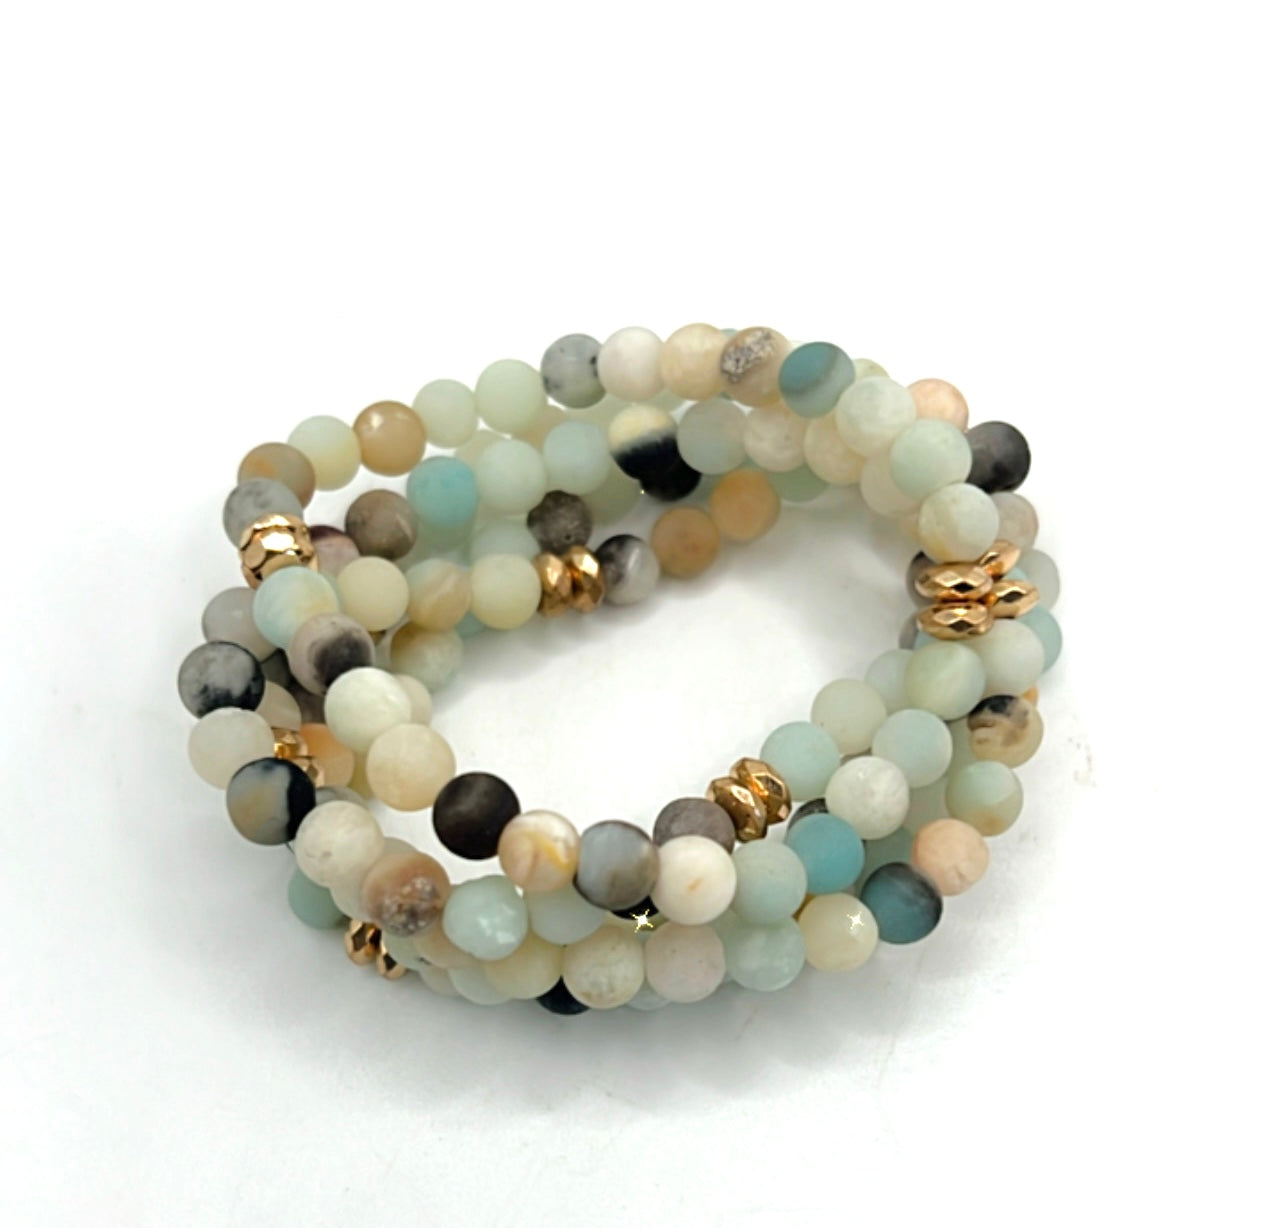 MATTE CARIBBEAN CALCITE BRACELET-  Psychic ability, astral travel, soothing the emotional body